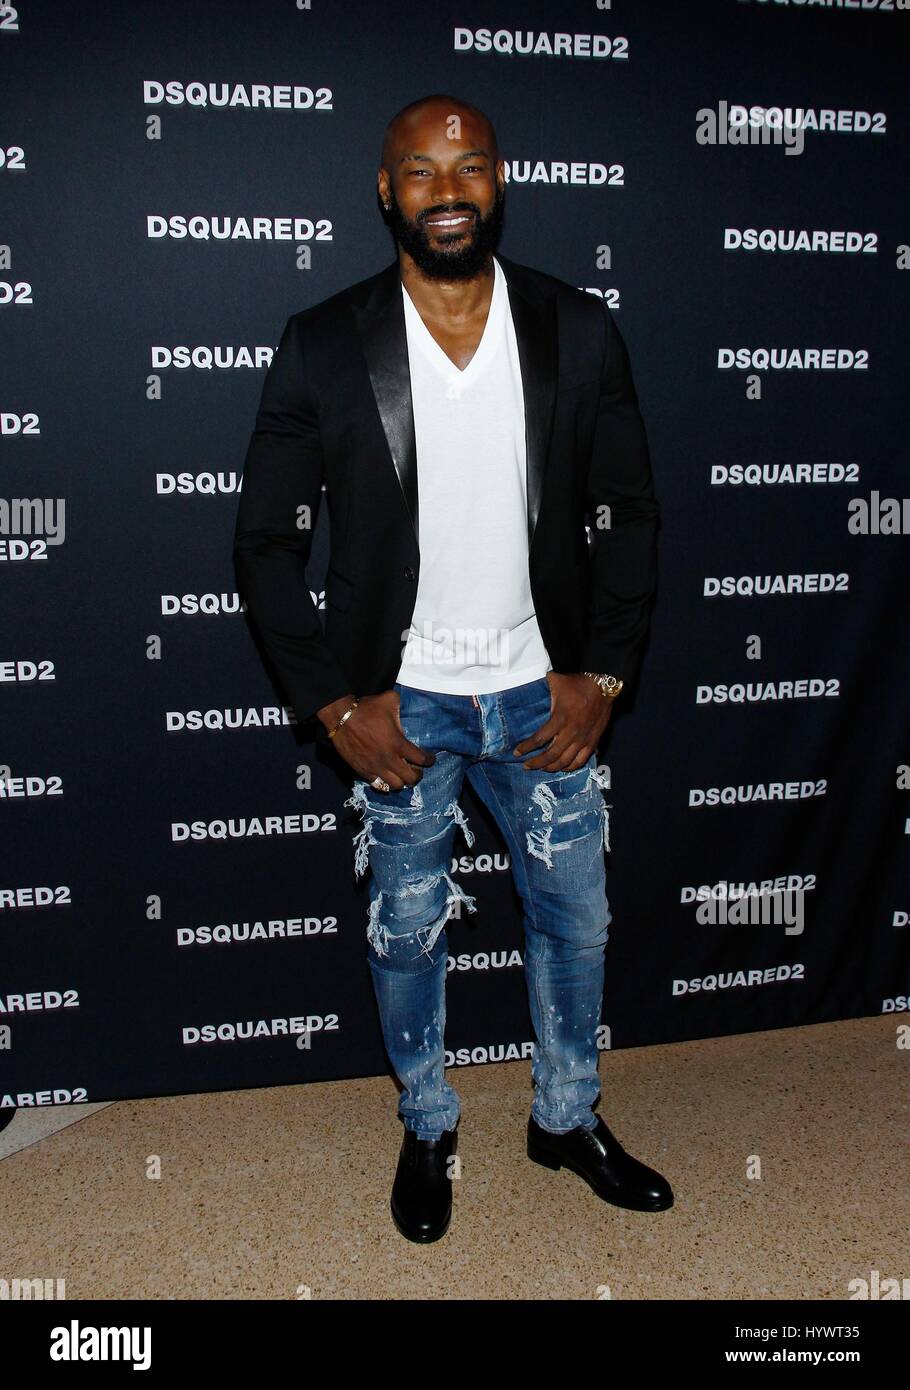 Las Vegas, NV, USA. 6th Apr, 2017. Tyson Beckford at arrivals for DSQUARED2  Grand Opening Party,